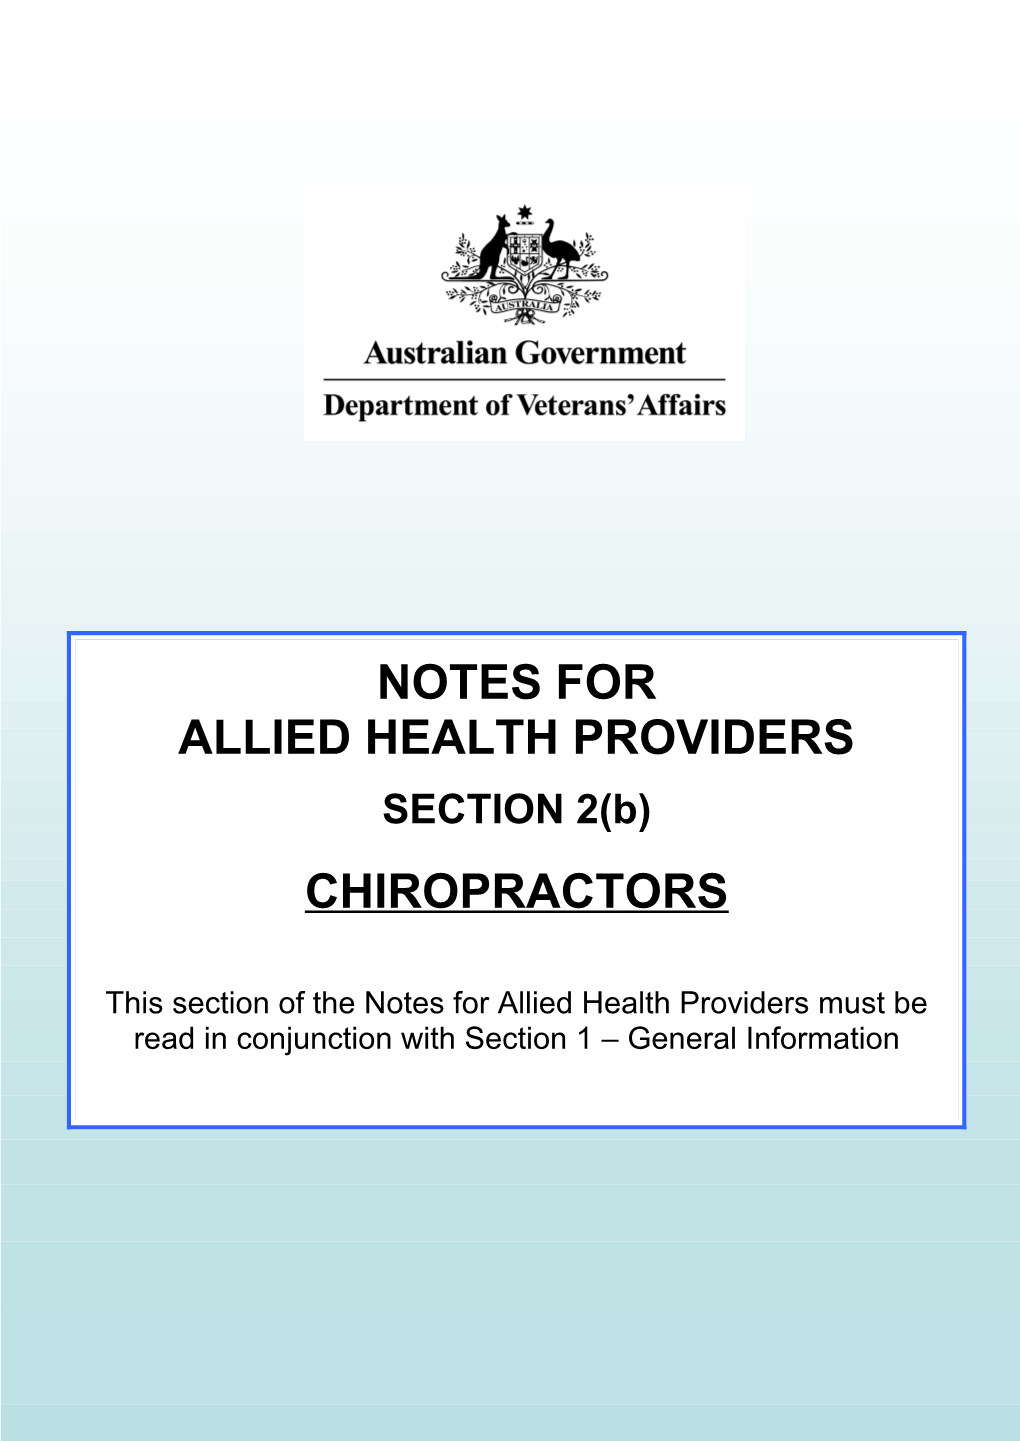 Notes for Allied Health Providers, Section 2B